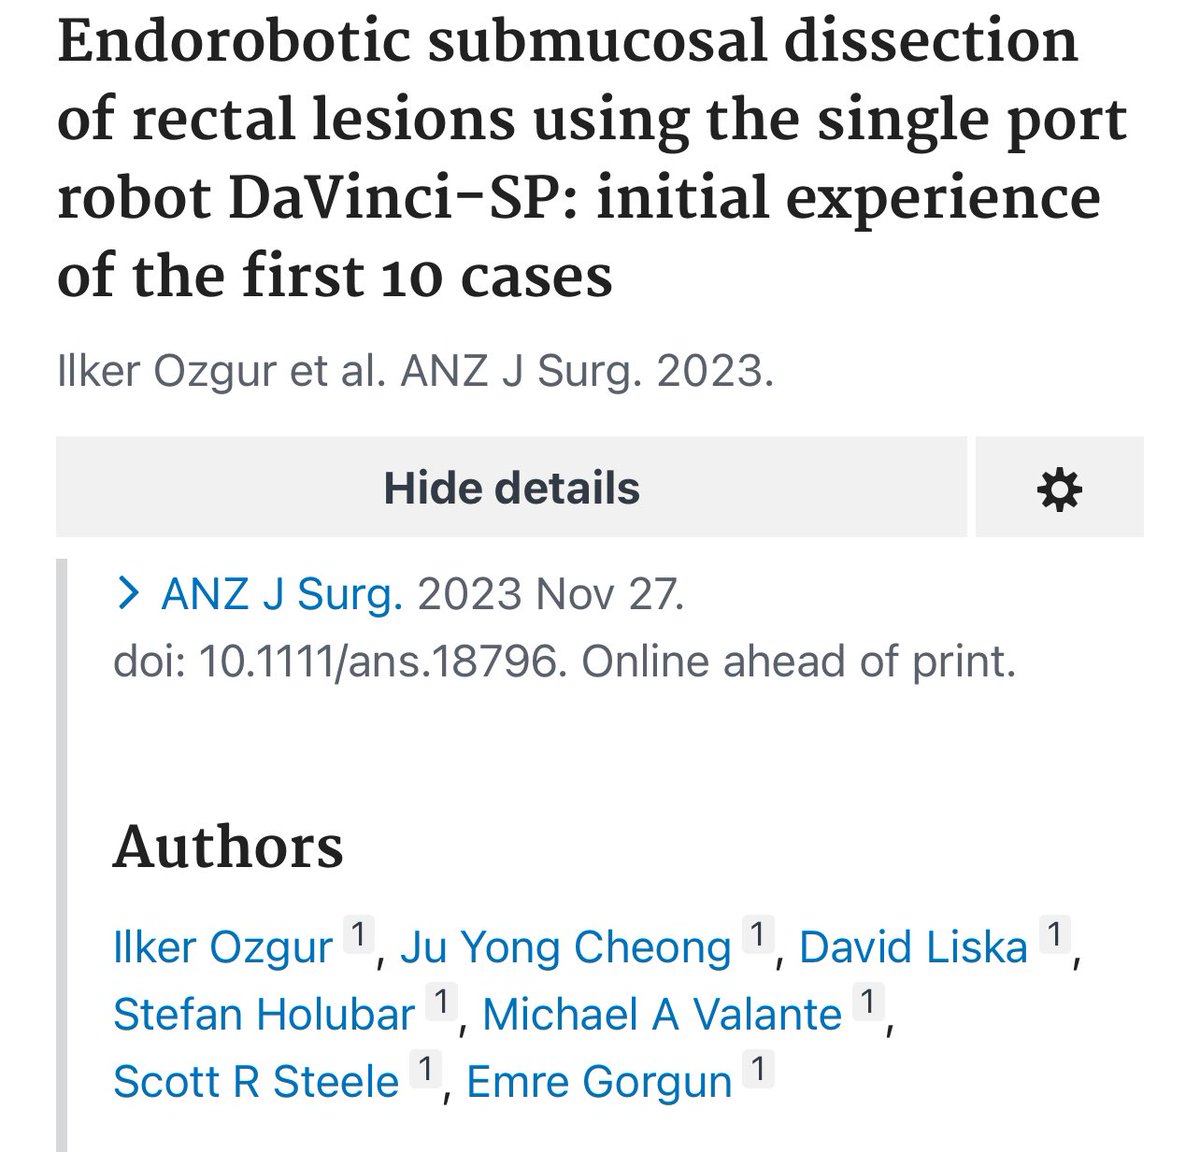 @caycedomarula This is our initial case series published last year. Have several other video vignettes and reports published! Our most recent series is in the final review process: hopefully for acceptance in another journal. Happy to exchange knowledge and learn from your experiences!